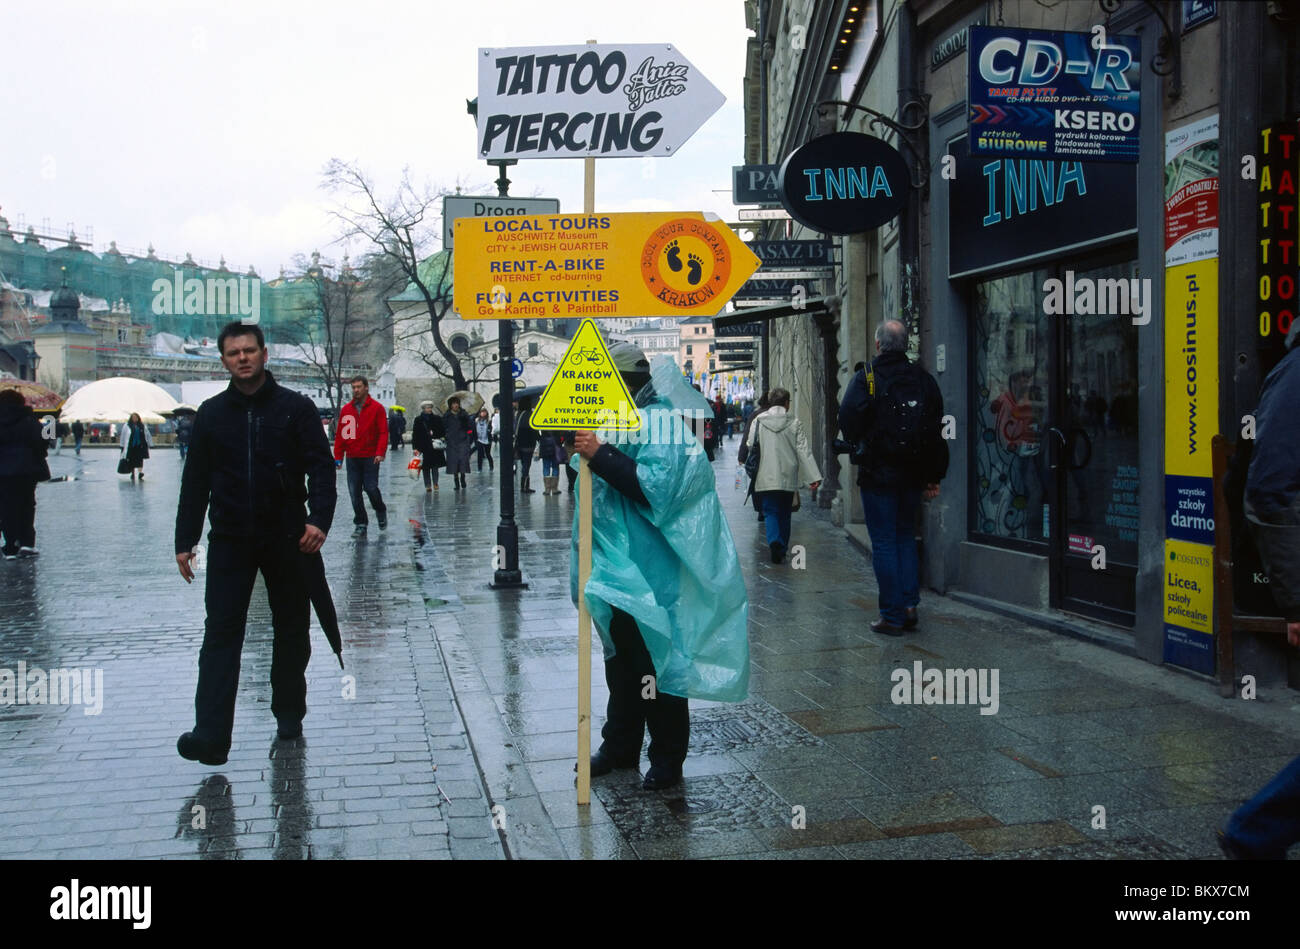 Krakow, April 2010 -- Man holds up advertisements for bike tours and a local tattoo and piercing shop. Stock Photo